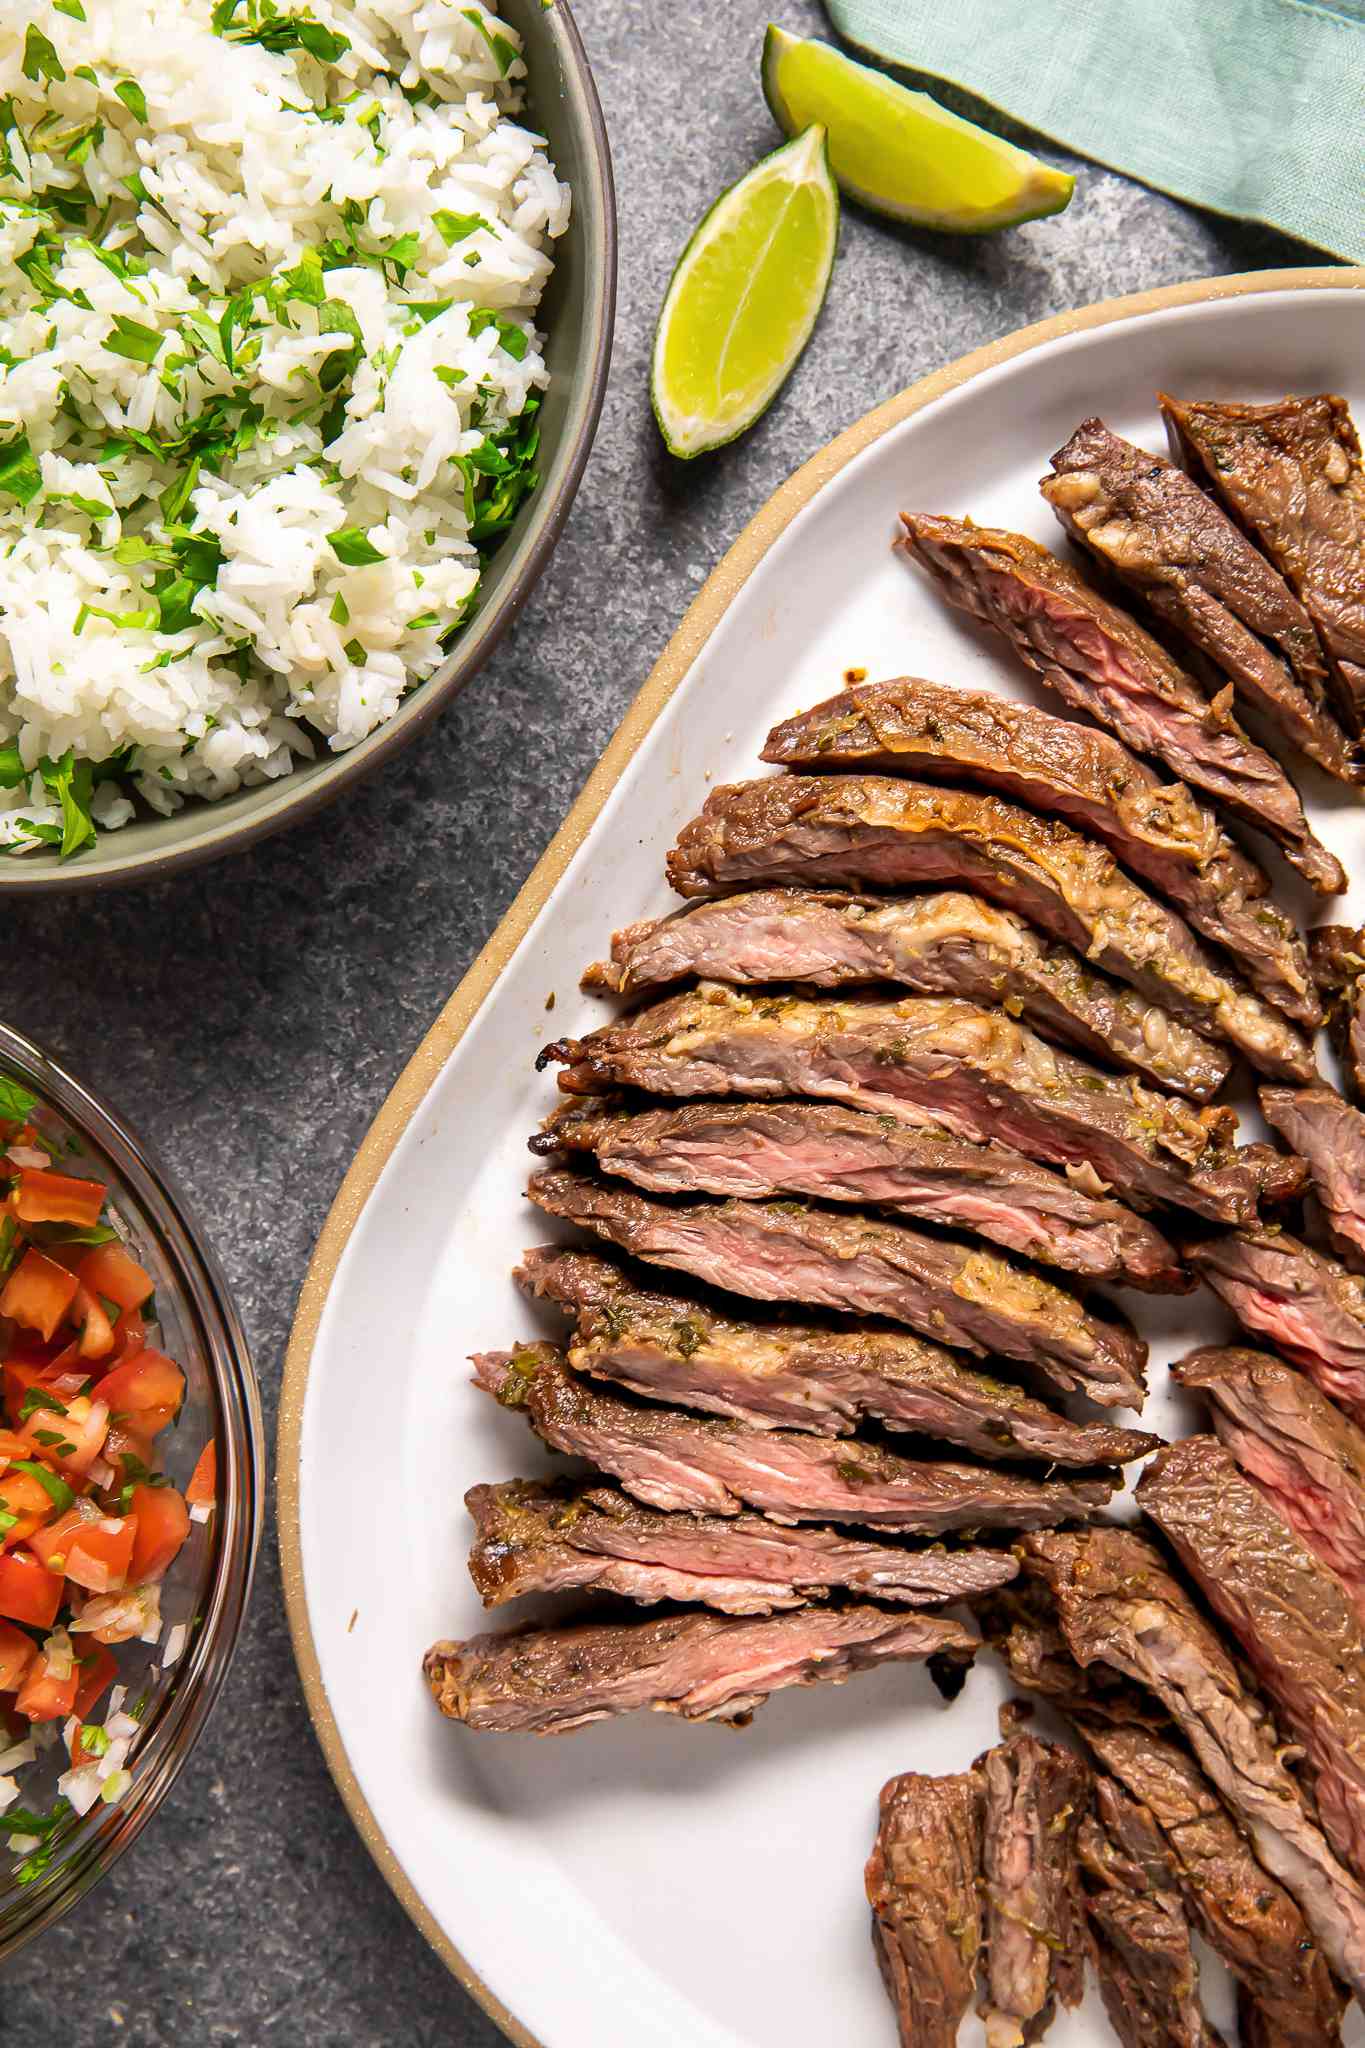 Arrachera (Mexican Skirt Steak) on a Platter Next to a Bowl of Salsa, a Bowl of Cilantro Rice, and Lime Wedges on the Counter